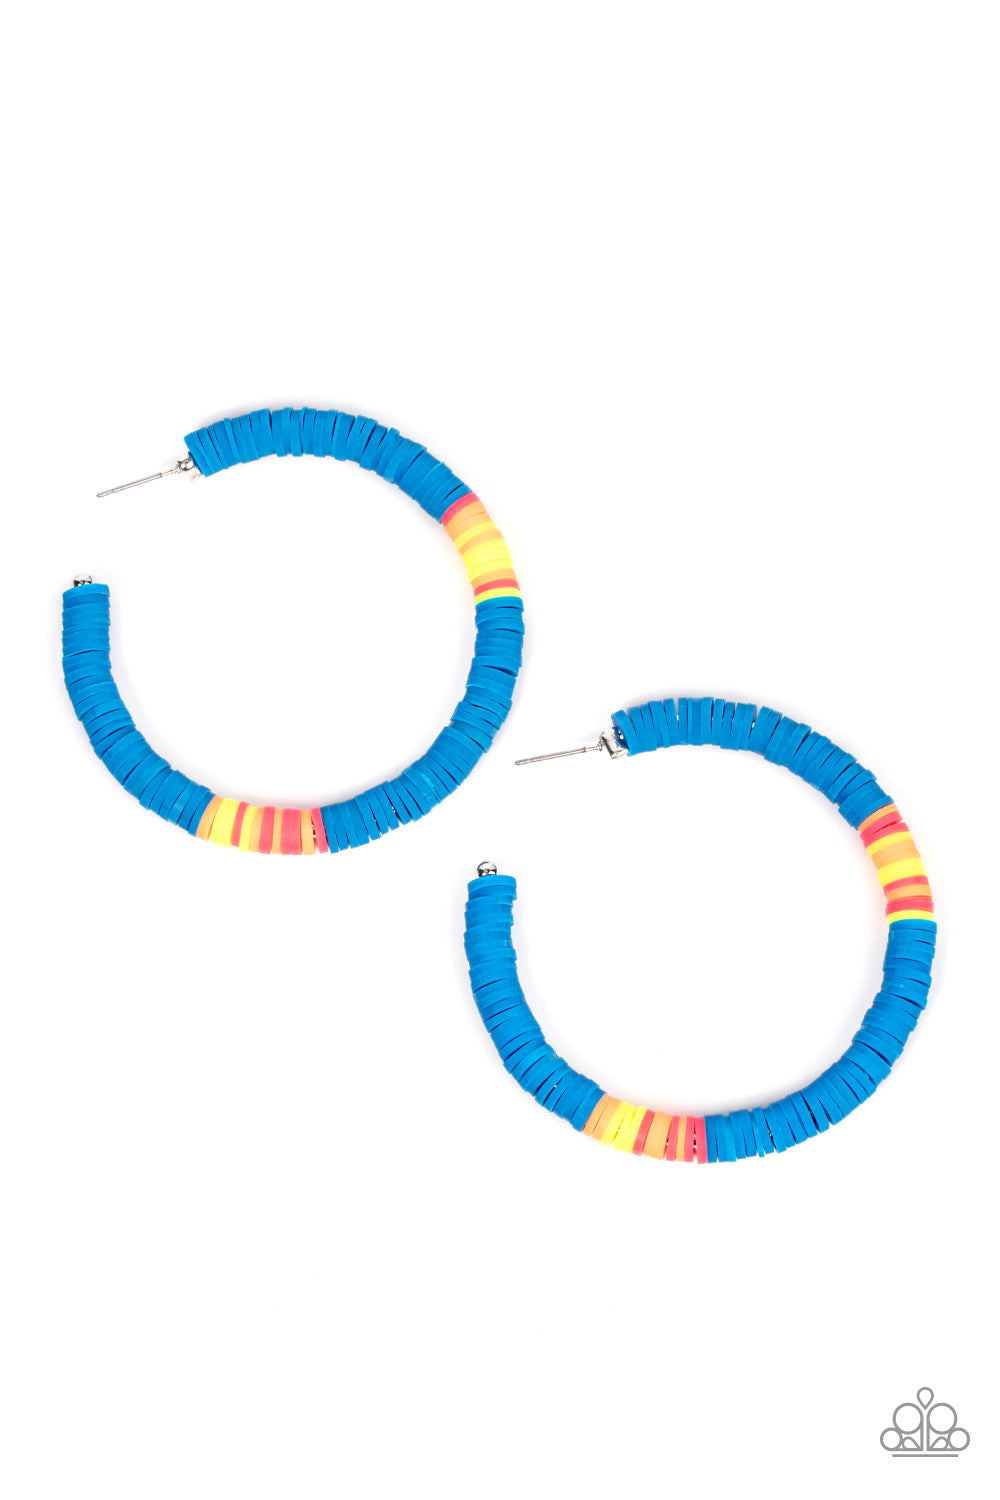 Colorfully Contagious Blue Hoop Earring - Paparazzi Accessories  Rubbery blue, pink, yellow, and orange bands are threaded along an oversized silver hoop, creating a courageous pop of color. Earring attaches to a standard post fitting. Hoop measures approximately 2 1/4" in diameter.  Sold as one pair of hoop earrings.